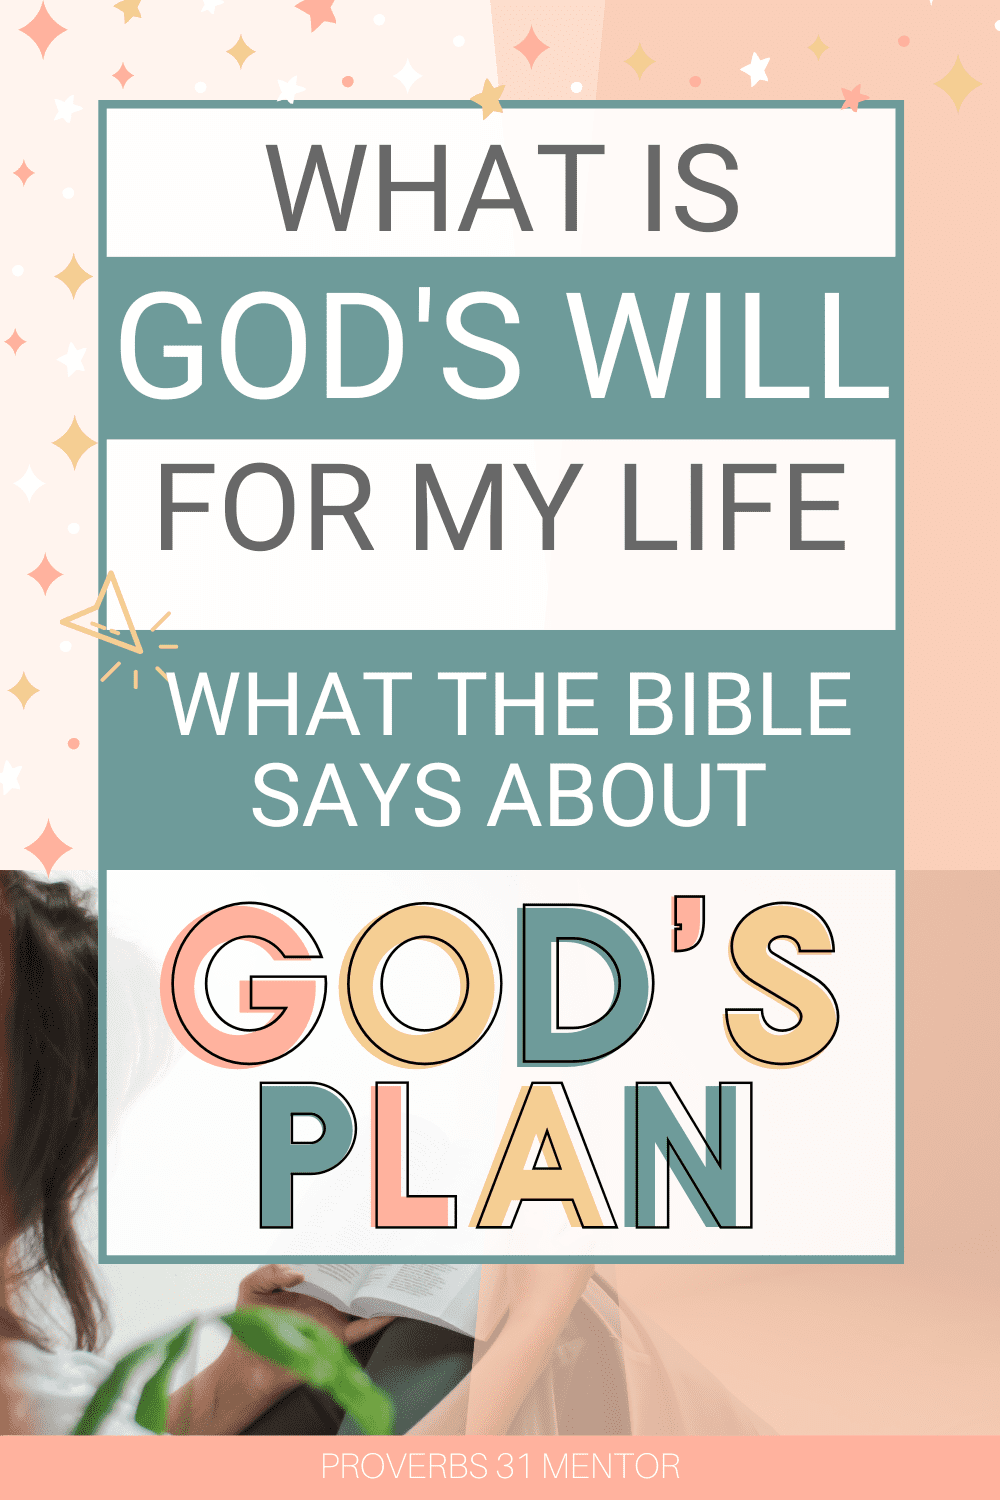 Bible verses on God's will and plan 